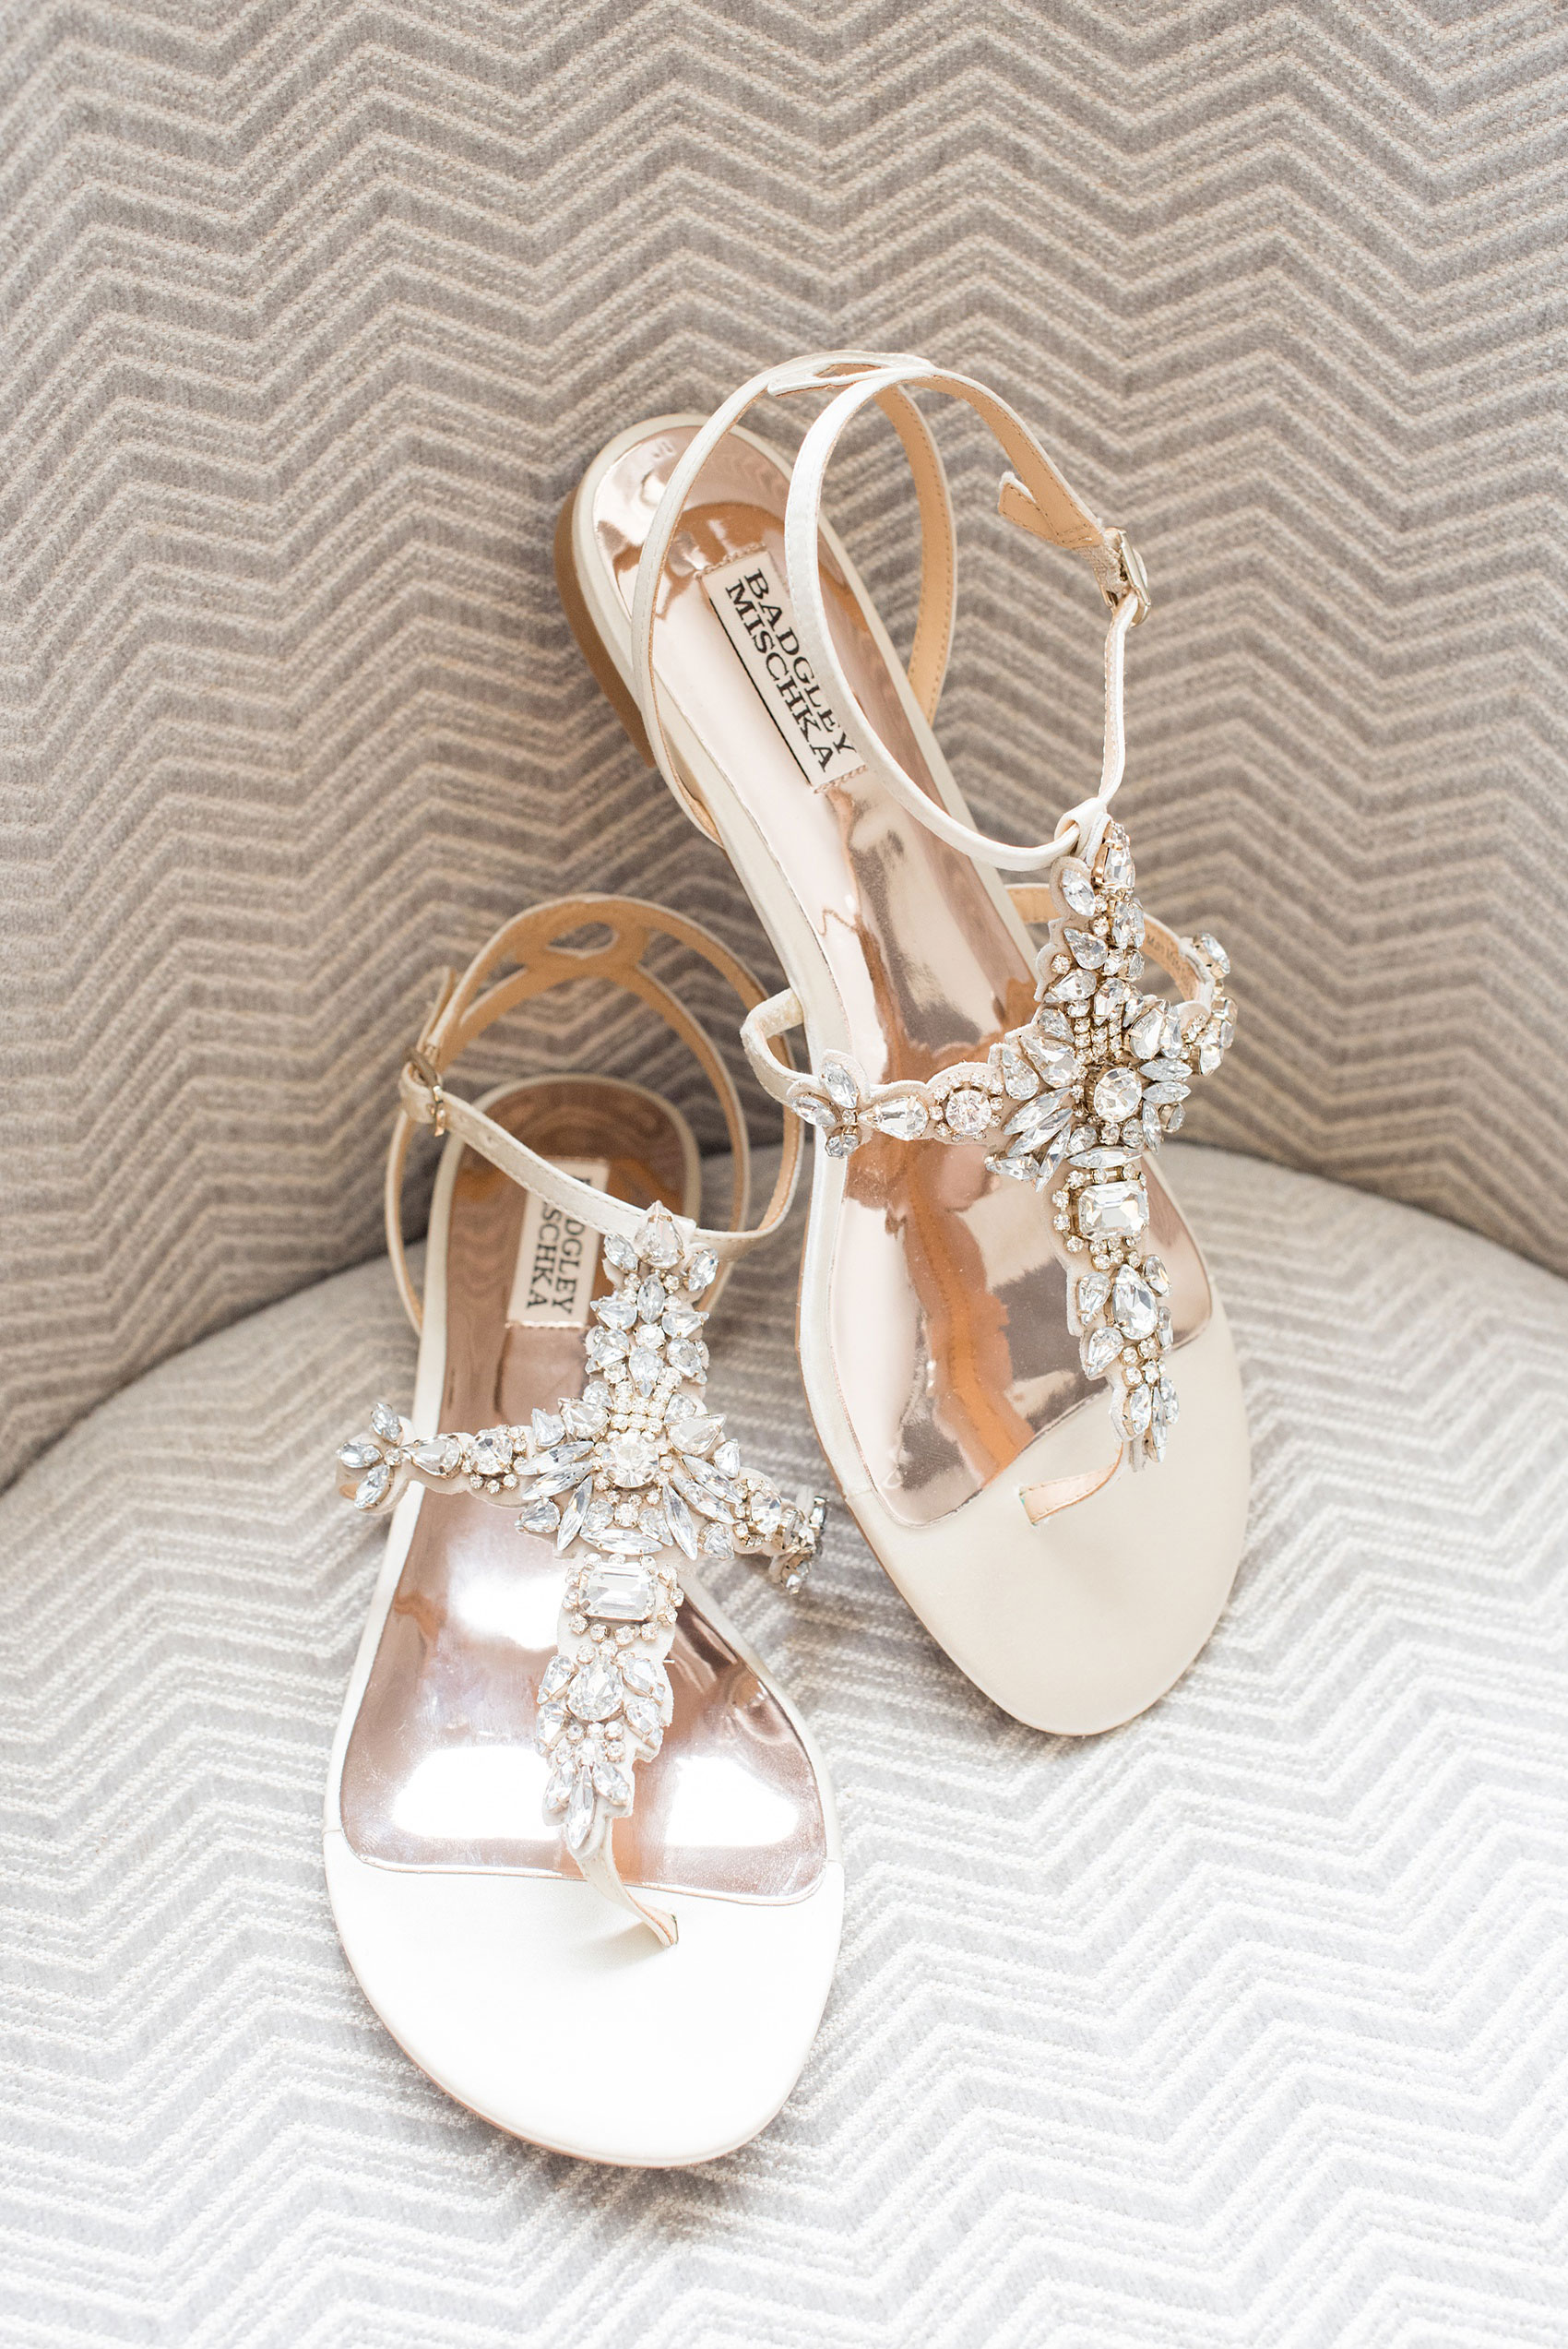 Pavilion at Angus Barn wedding photos by Mikkel Paige Photography. Detail picture of the bride's rhinestone Badgley Mischka formal bridal sandals.